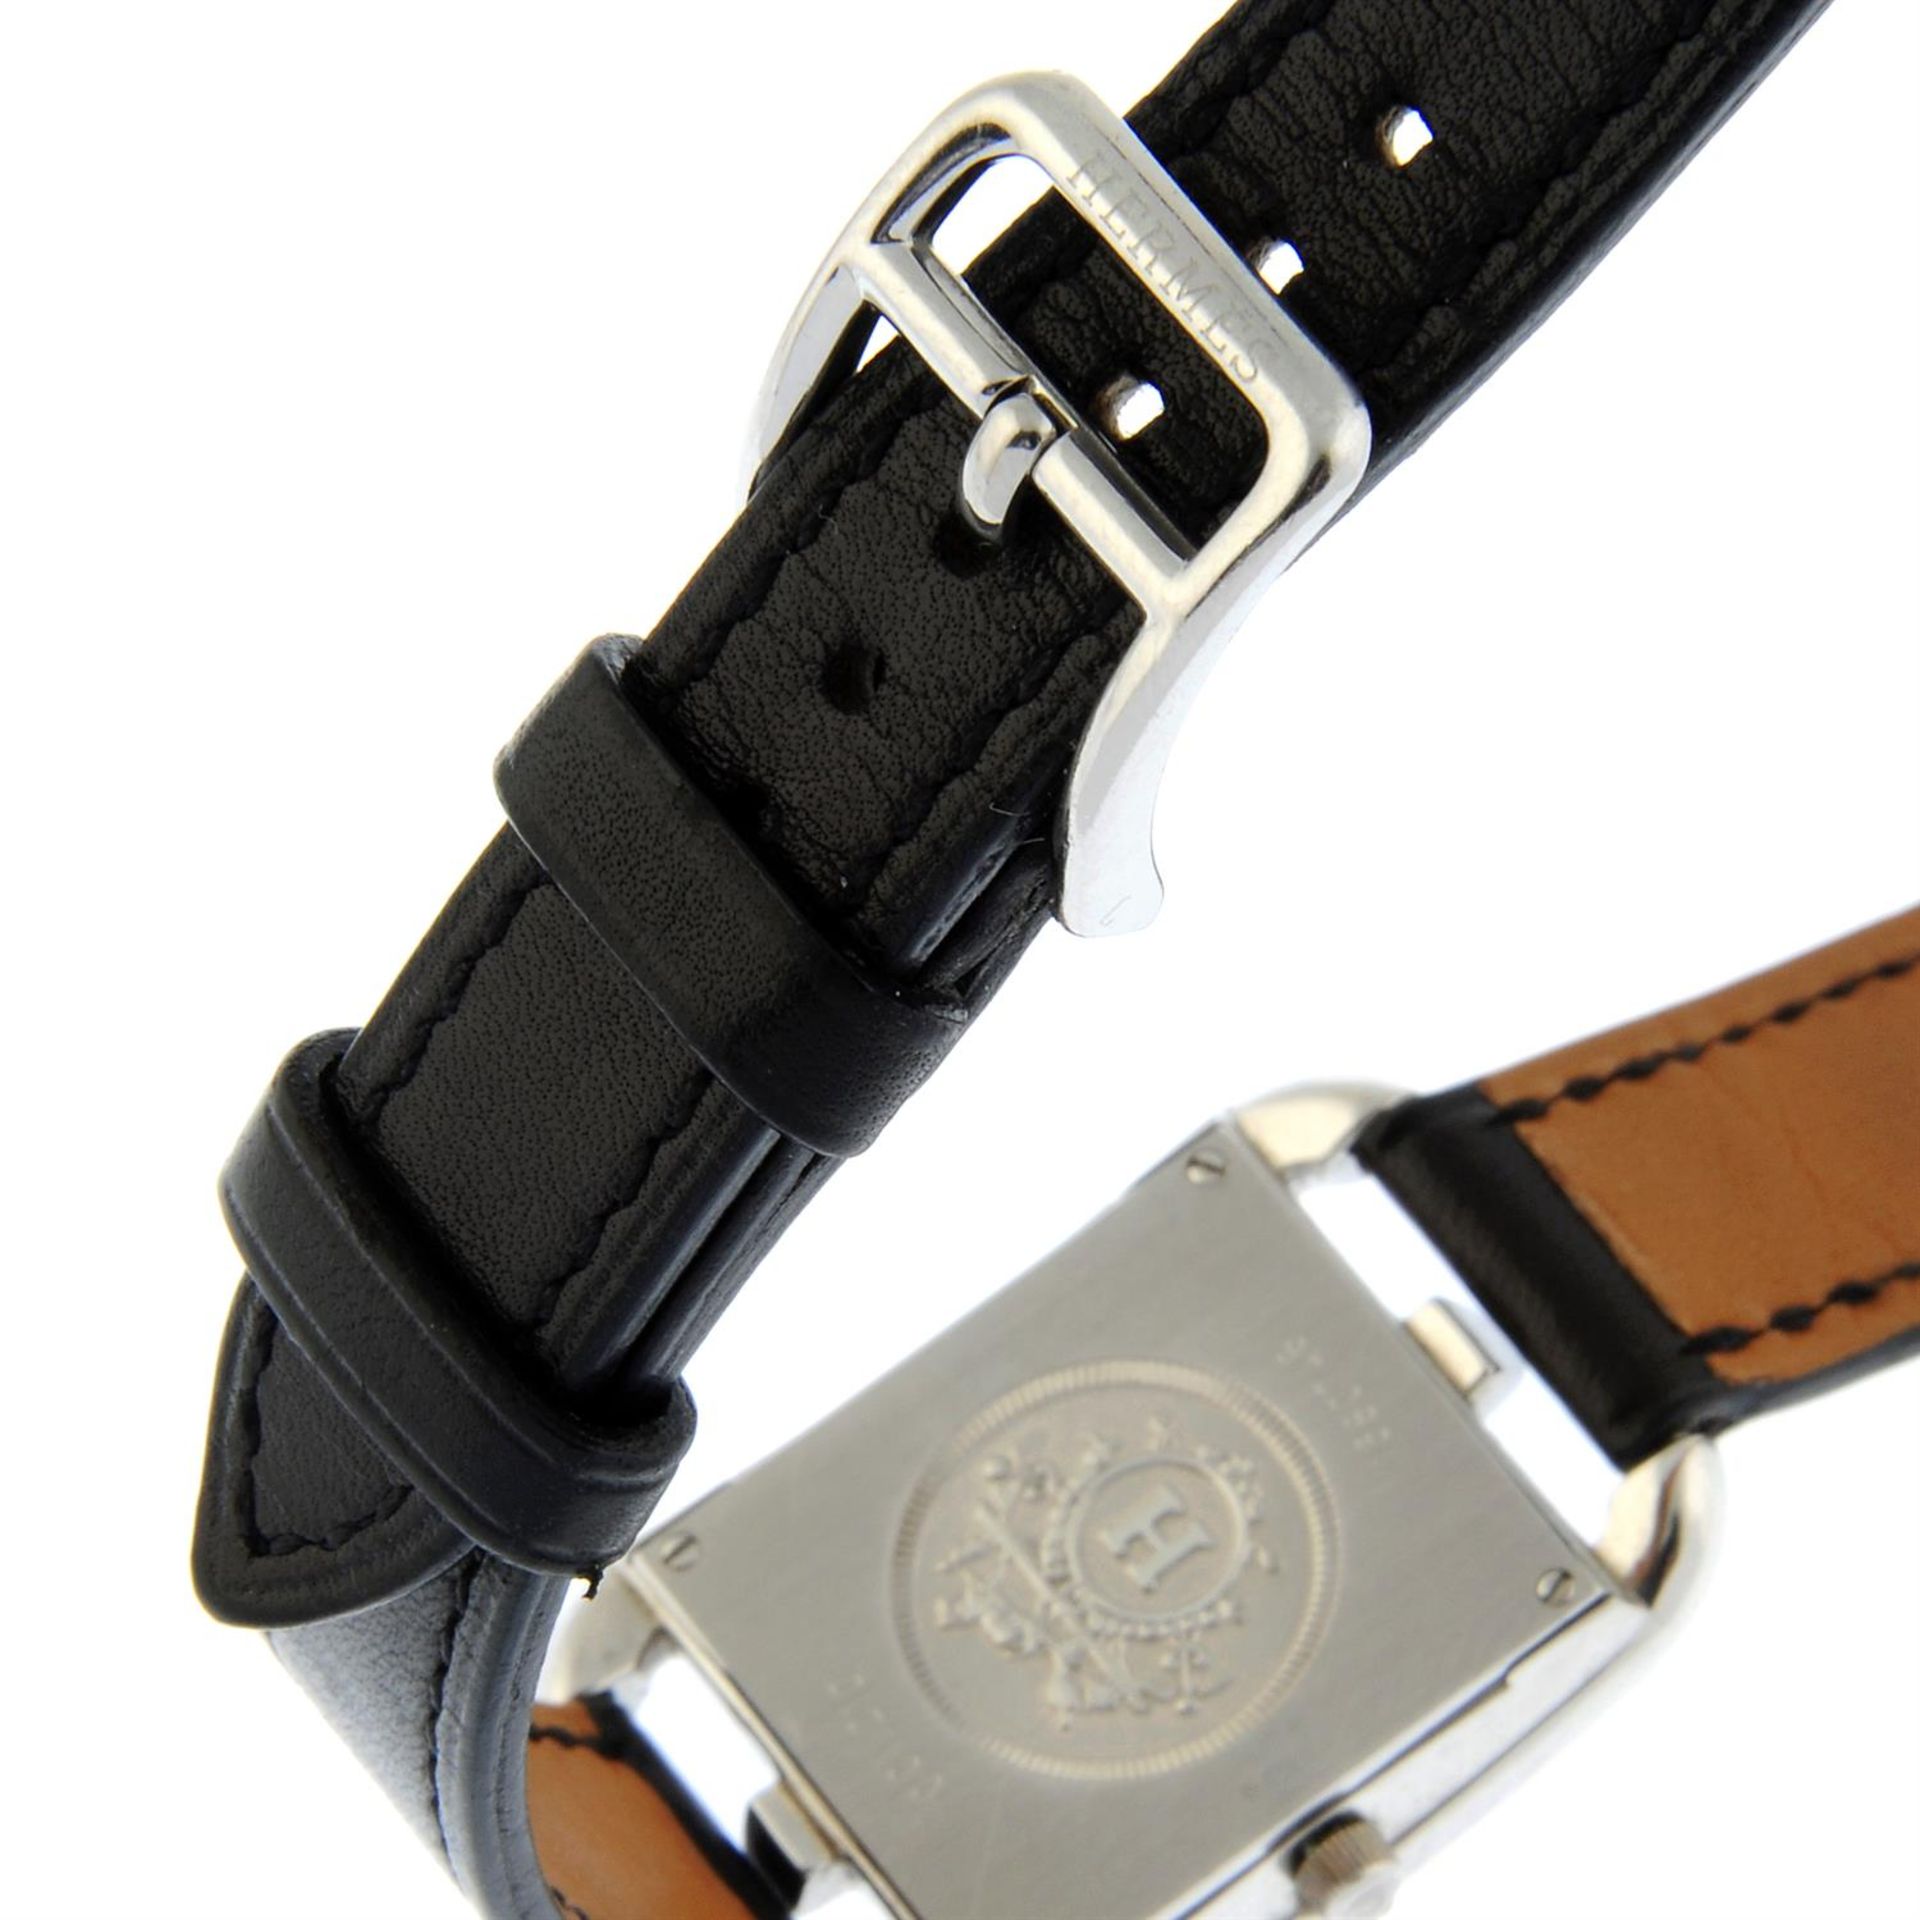 Hermes - a Cape Cod watch, 23mm. - Image 2 of 6